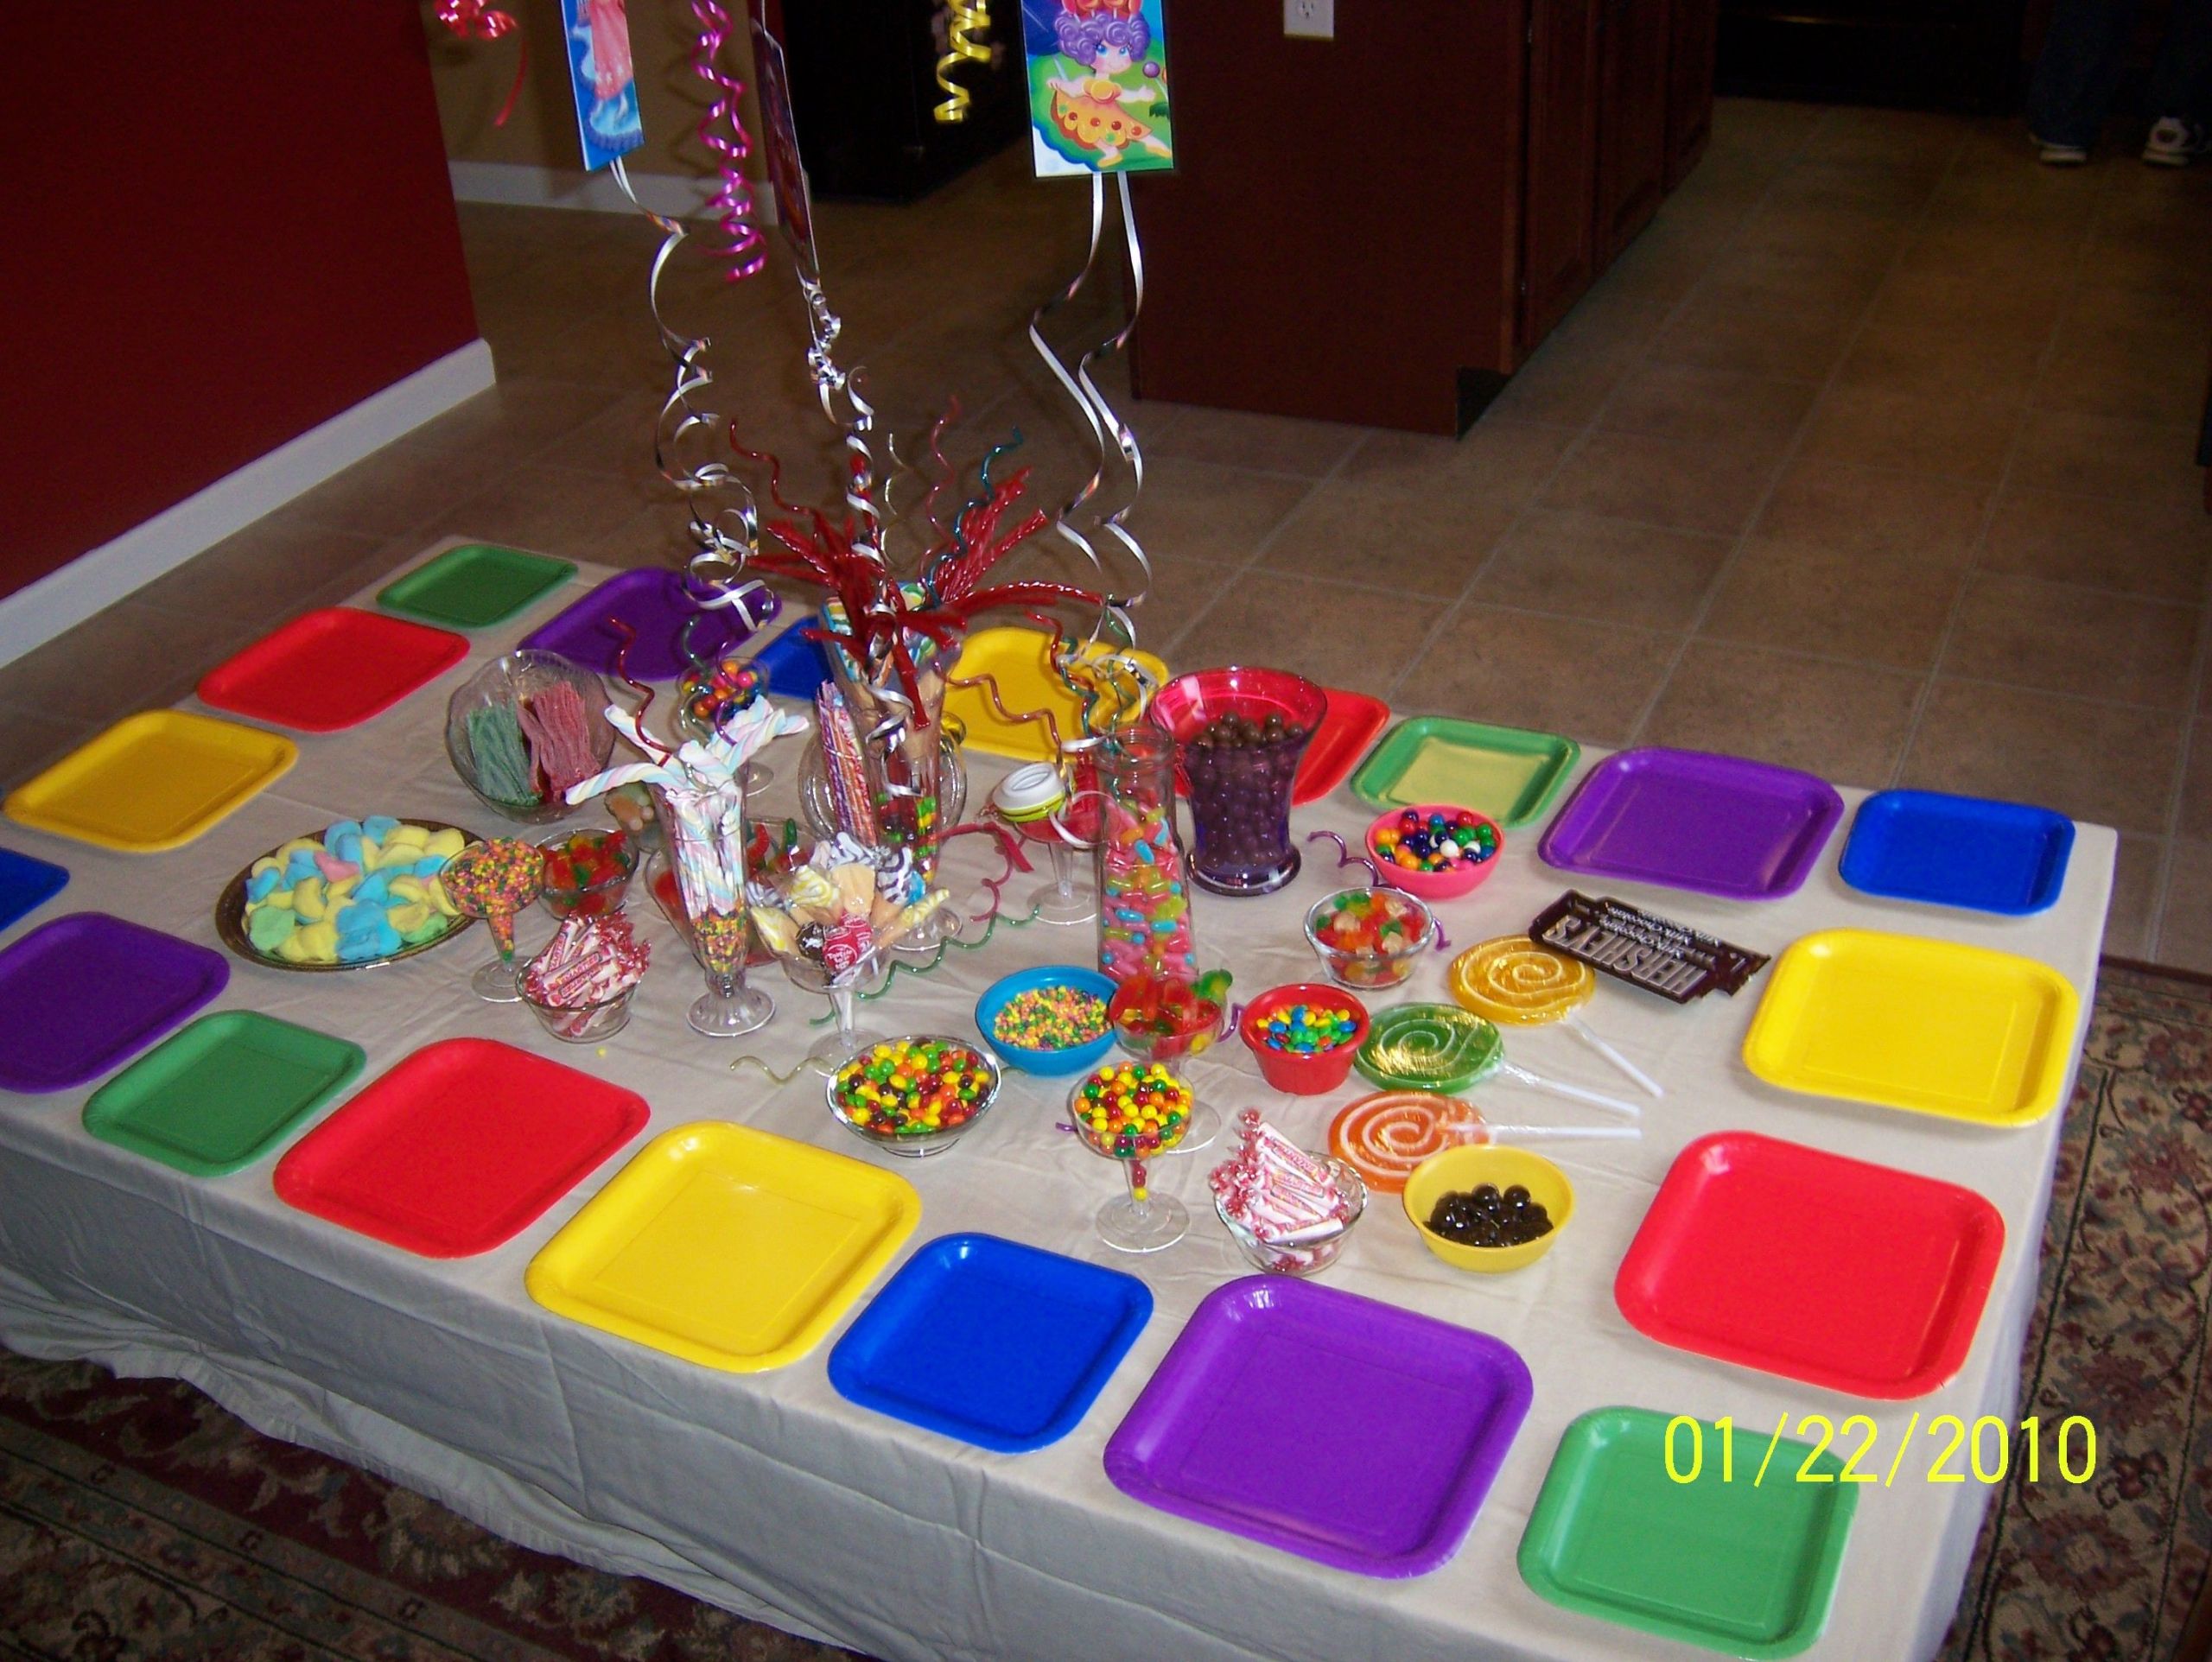 Candyland 1St Birthday Party Ideas
 Candyland Birthday Party table great idea with the